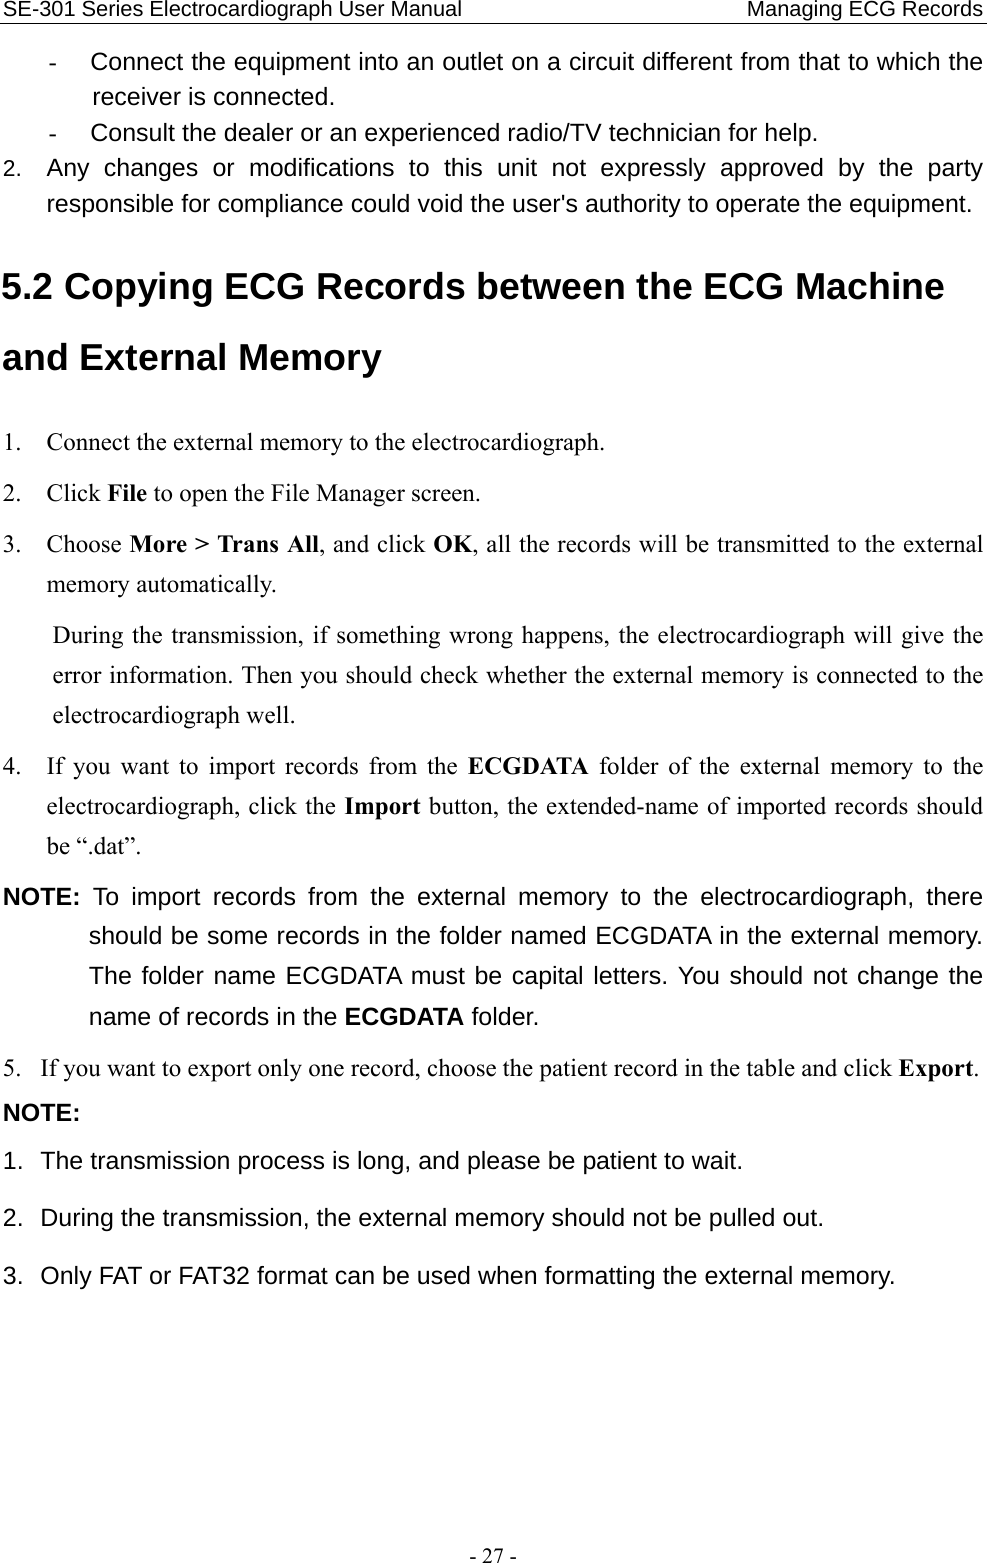 SE-301 Series Electrocardiograph User Manual                          Managing ECG Records - 27 - -  Connect the equipment into an outlet on a circuit different from that to which the receiver is connected. -  Consult the dealer or an experienced radio/TV technician for help. 2.  Any changes or modifications to this unit not expressly approved by the party responsible for compliance could void the user&apos;s authority to operate the equipment. 5.2 Copying ECG Records between the ECG Machine and External Memory 1. Connect the external memory to the electrocardiograph. 2. Click File to open the File Manager screen. 3. Choose More &gt; Trans All, and click OK, all the records will be transmitted to the external memory automatically. During the transmission, if something wrong happens, the electrocardiograph will give the error information. Then you should check whether the external memory is connected to the electrocardiograph well. 4. If you want to import records from the ECGDATA folder of the external memory to the electrocardiograph, click the Import button, the extended-name of imported records should be “.dat”. NOTE: To import records from the external memory to the electrocardiograph, there should be some records in the folder named ECGDATA in the external memory. The folder name ECGDATA must be capital letters. You should not change the name of records in the ECGDATA folder. 5. If you want to export only one record, choose the patient record in the table and click Export. NOTE:  1.  The transmission process is long, and please be patient to wait.   2.  During the transmission, the external memory should not be pulled out. 3.  Only FAT or FAT32 format can be used when formatting the external memory. 